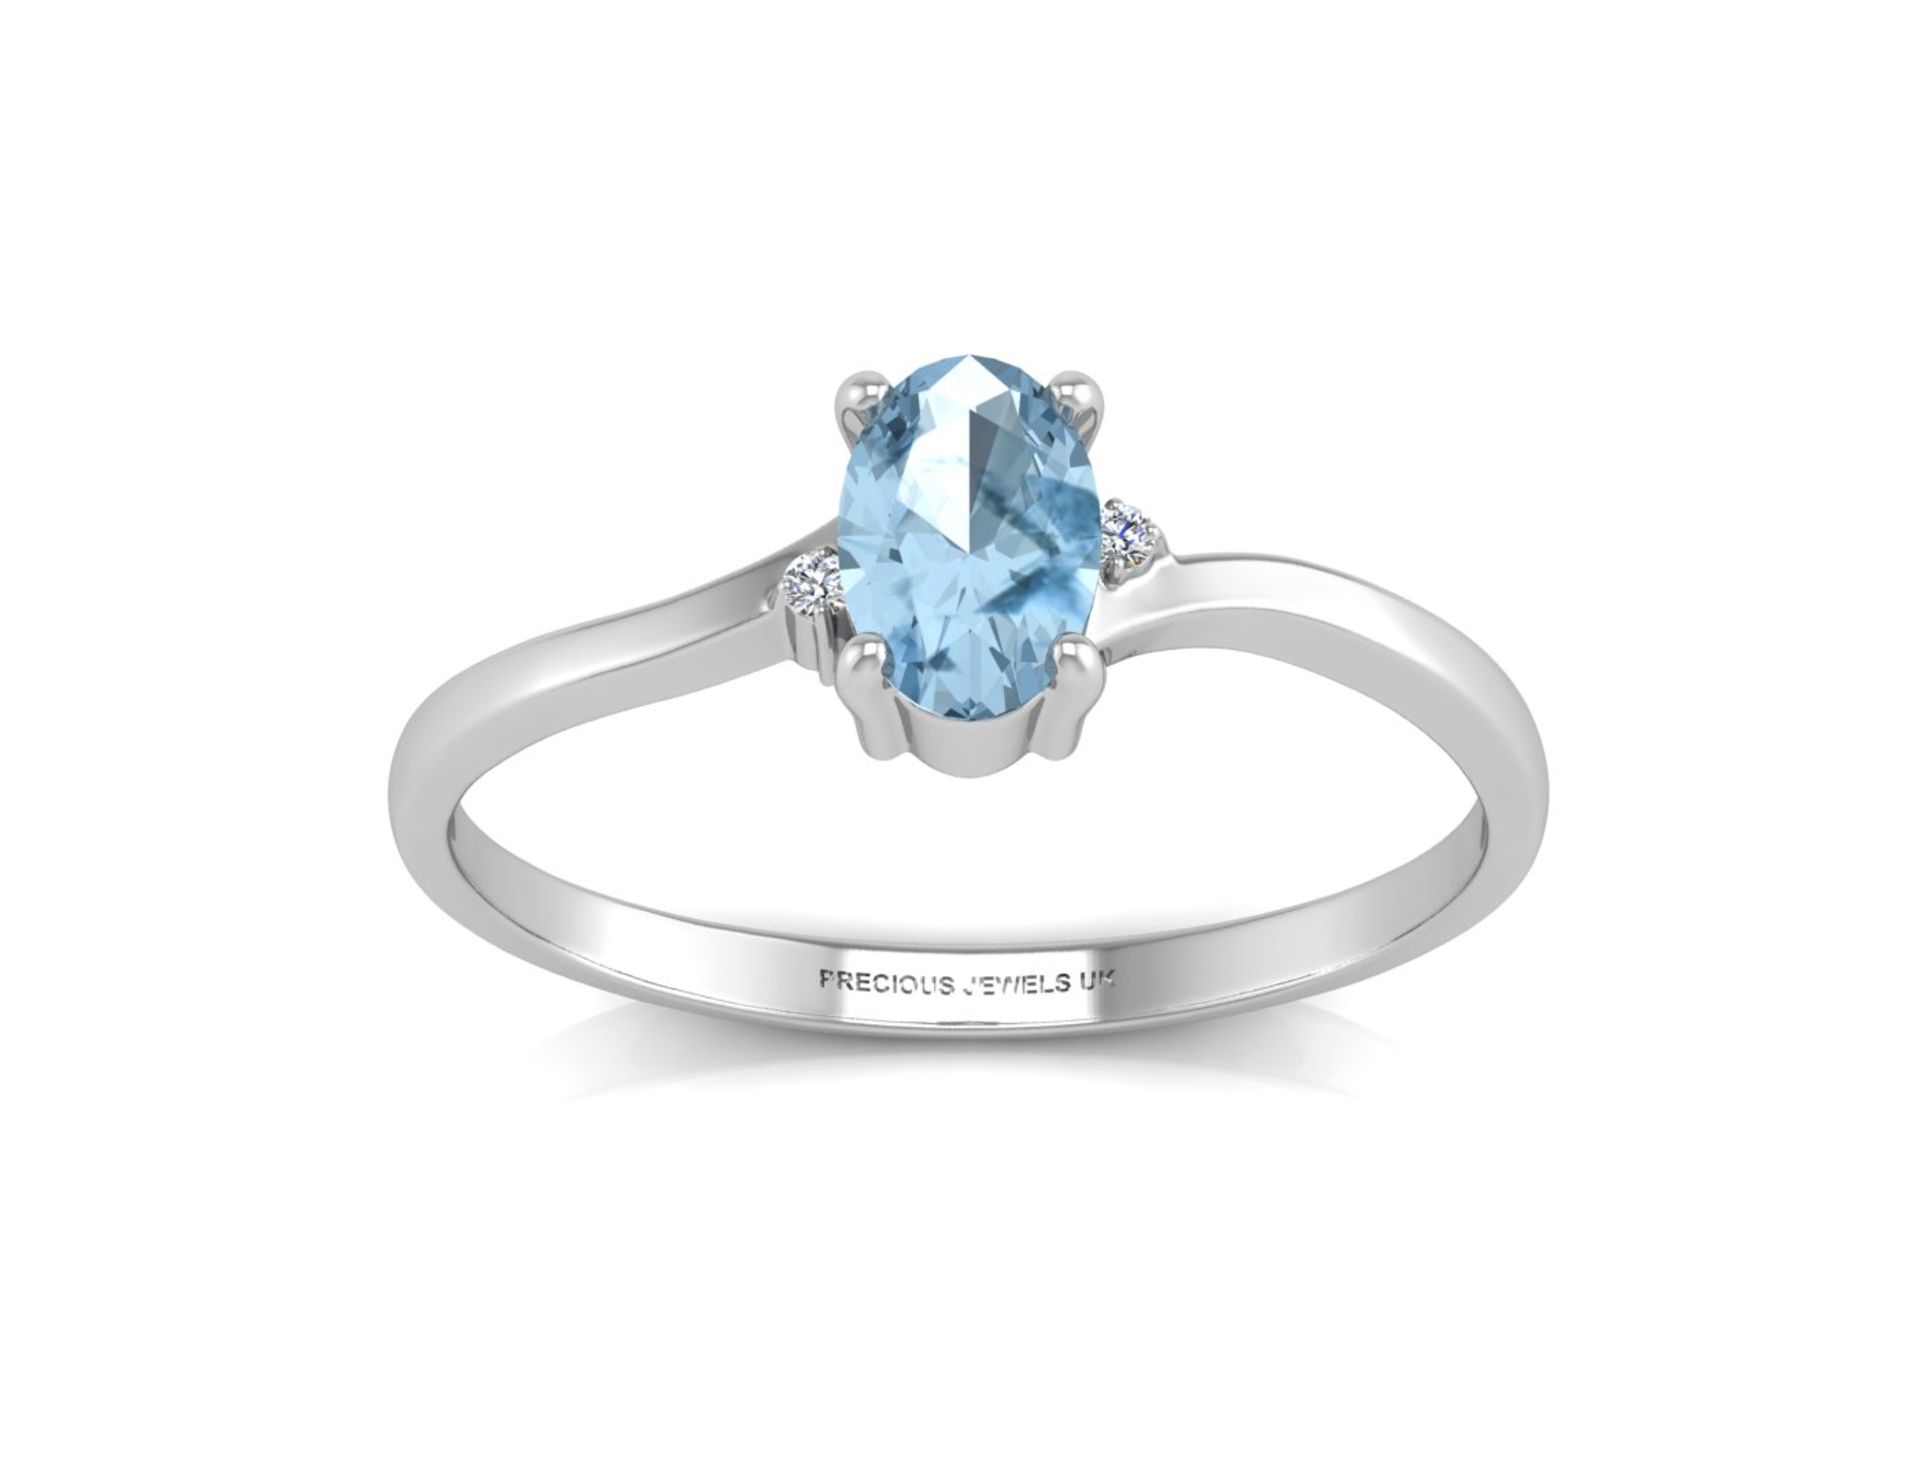 9ct White Gold Diamond and Oval Shape Blue Topaz Ring 0.01 Carats - Valued by AGI £650.00 - 9ct